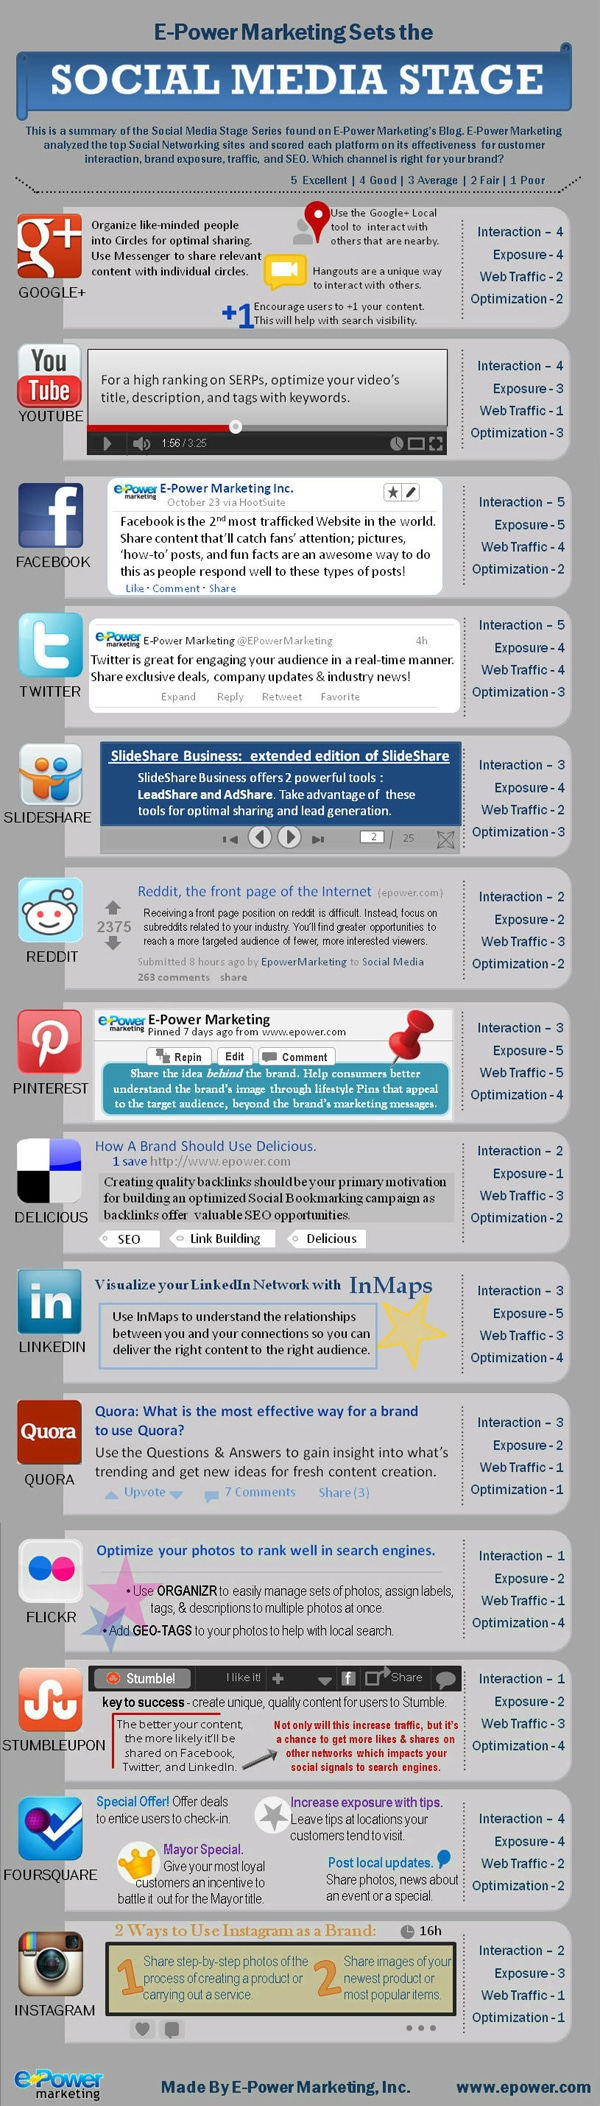 Effectiveness Comparison Of Top Social Media Networks [Infographic]